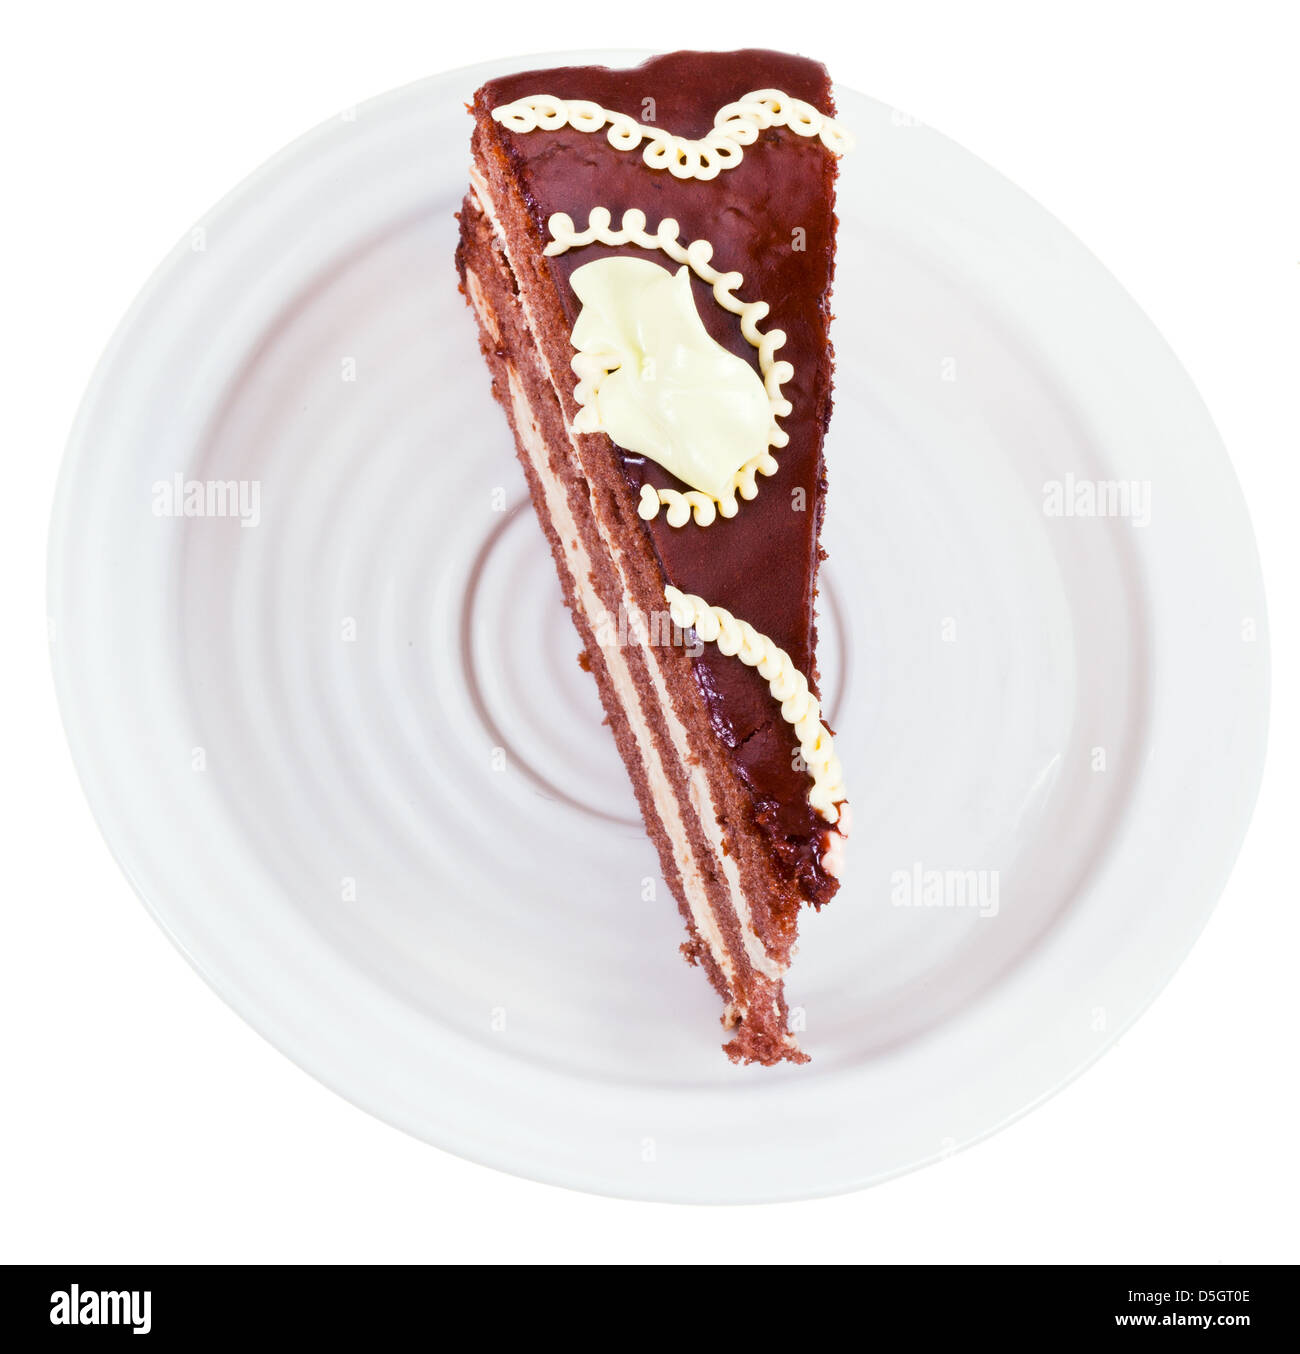 top view of chocolate cake piece on plate isolated on white background Stock Photo